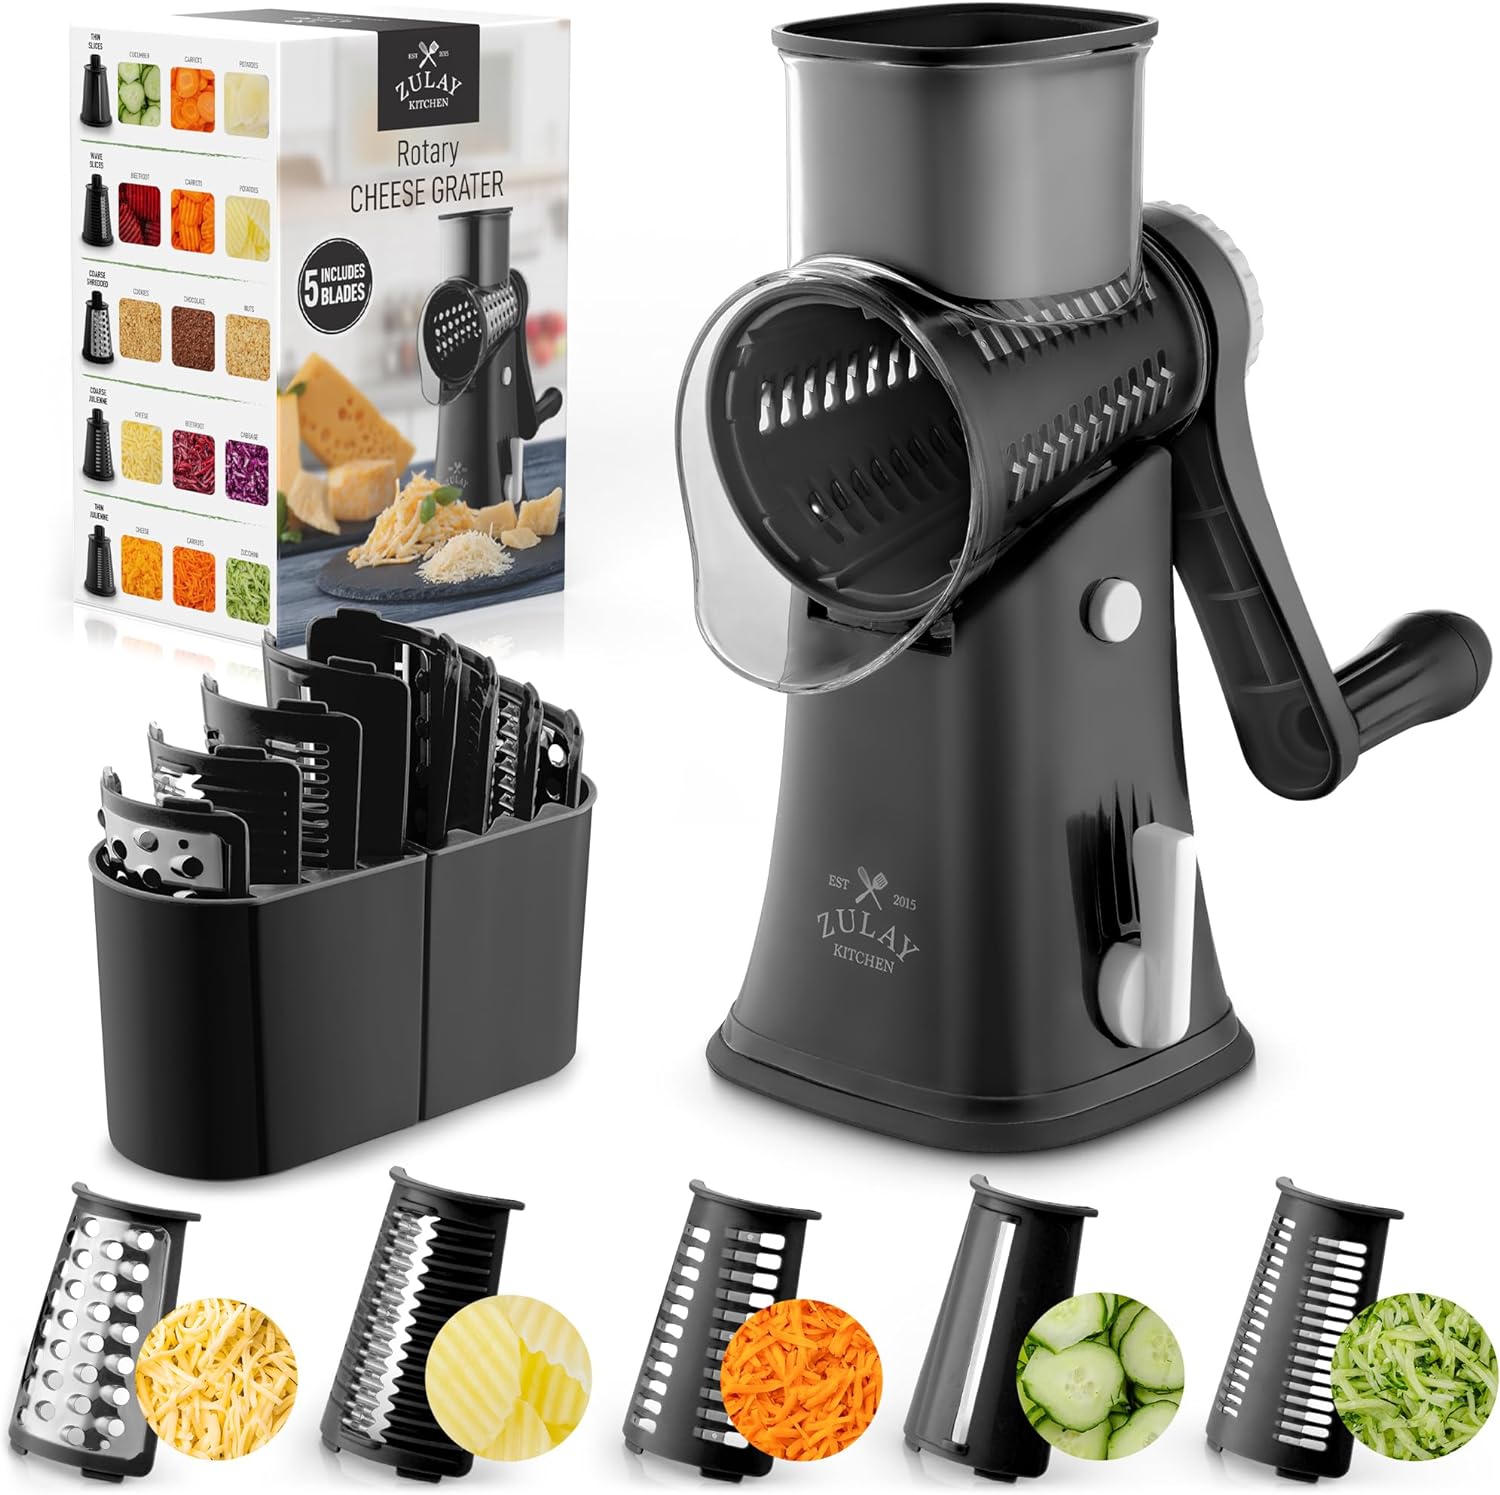 Zulay Kitchen Rotary Cheese Grater With 3 Replaceable Drum Blades